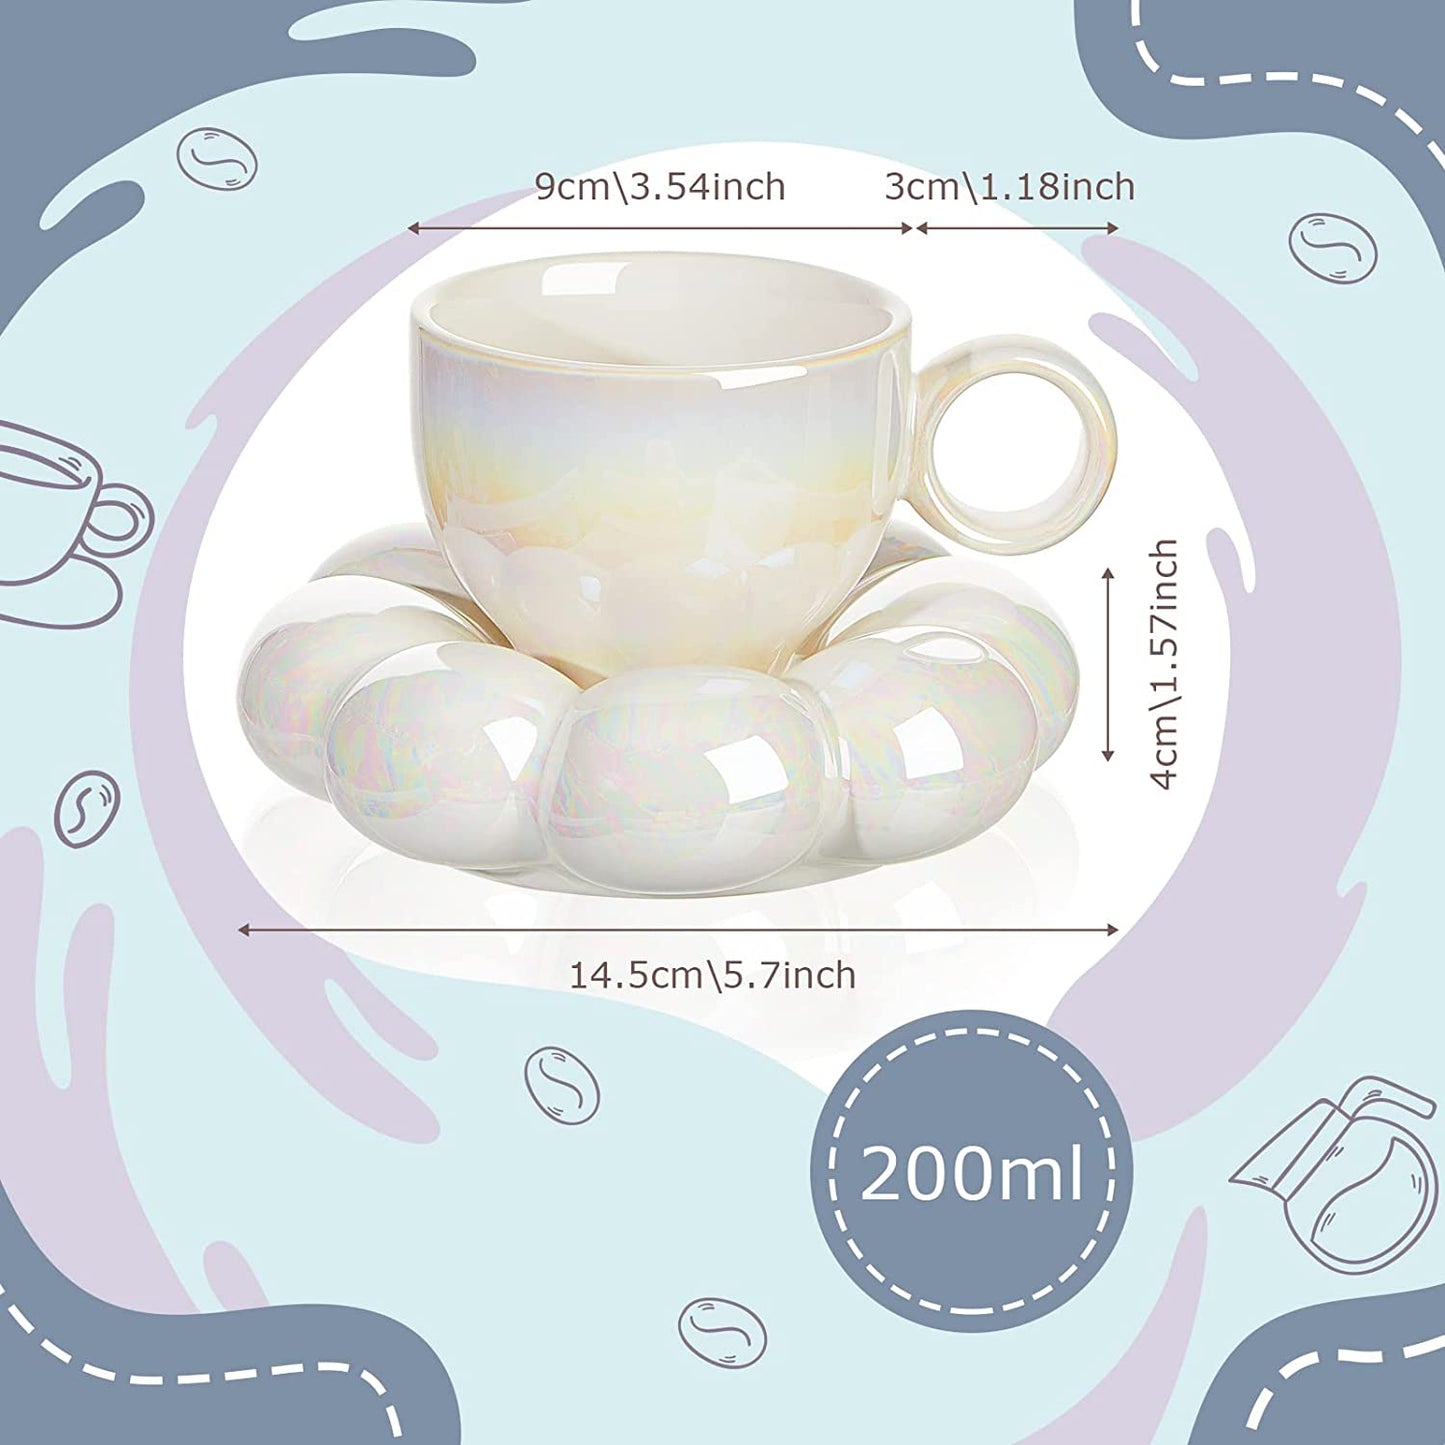 2 Pieces Ceramic Cloud Mug Cute Cup with Sunflower Coaster 7oz Cute Ceramic Coffee Mug with Saucer Set for Office Home Coffee Tea Latte Milk, Pink and Pearl White